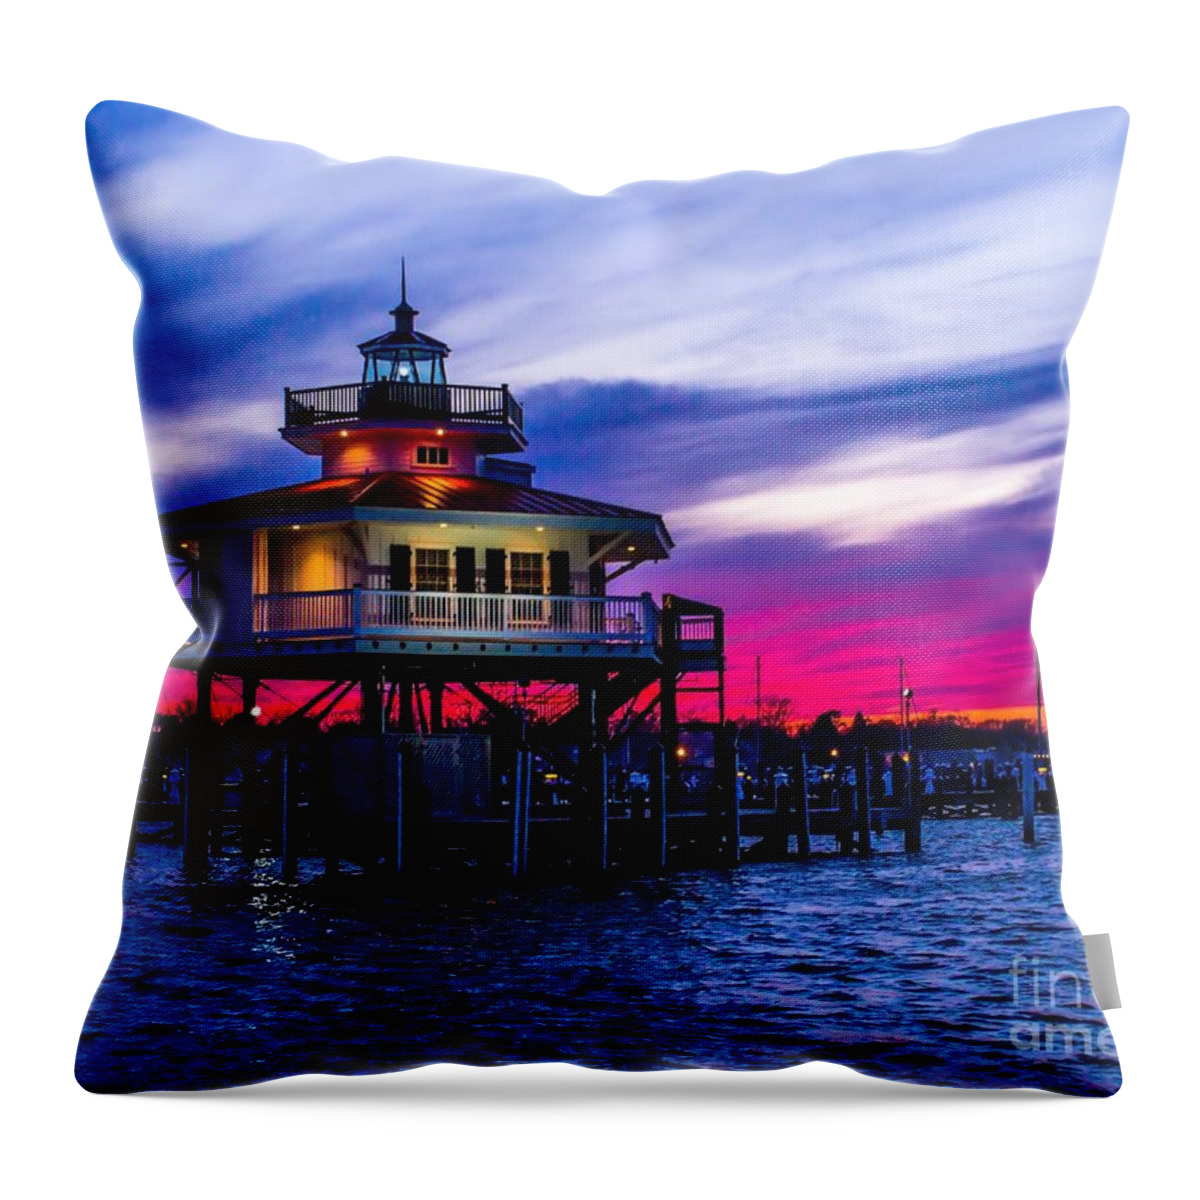 Choptank Throw Pillow featuring the photograph Choptank River Lighthouse at Dusk by Nick Zelinsky Jr